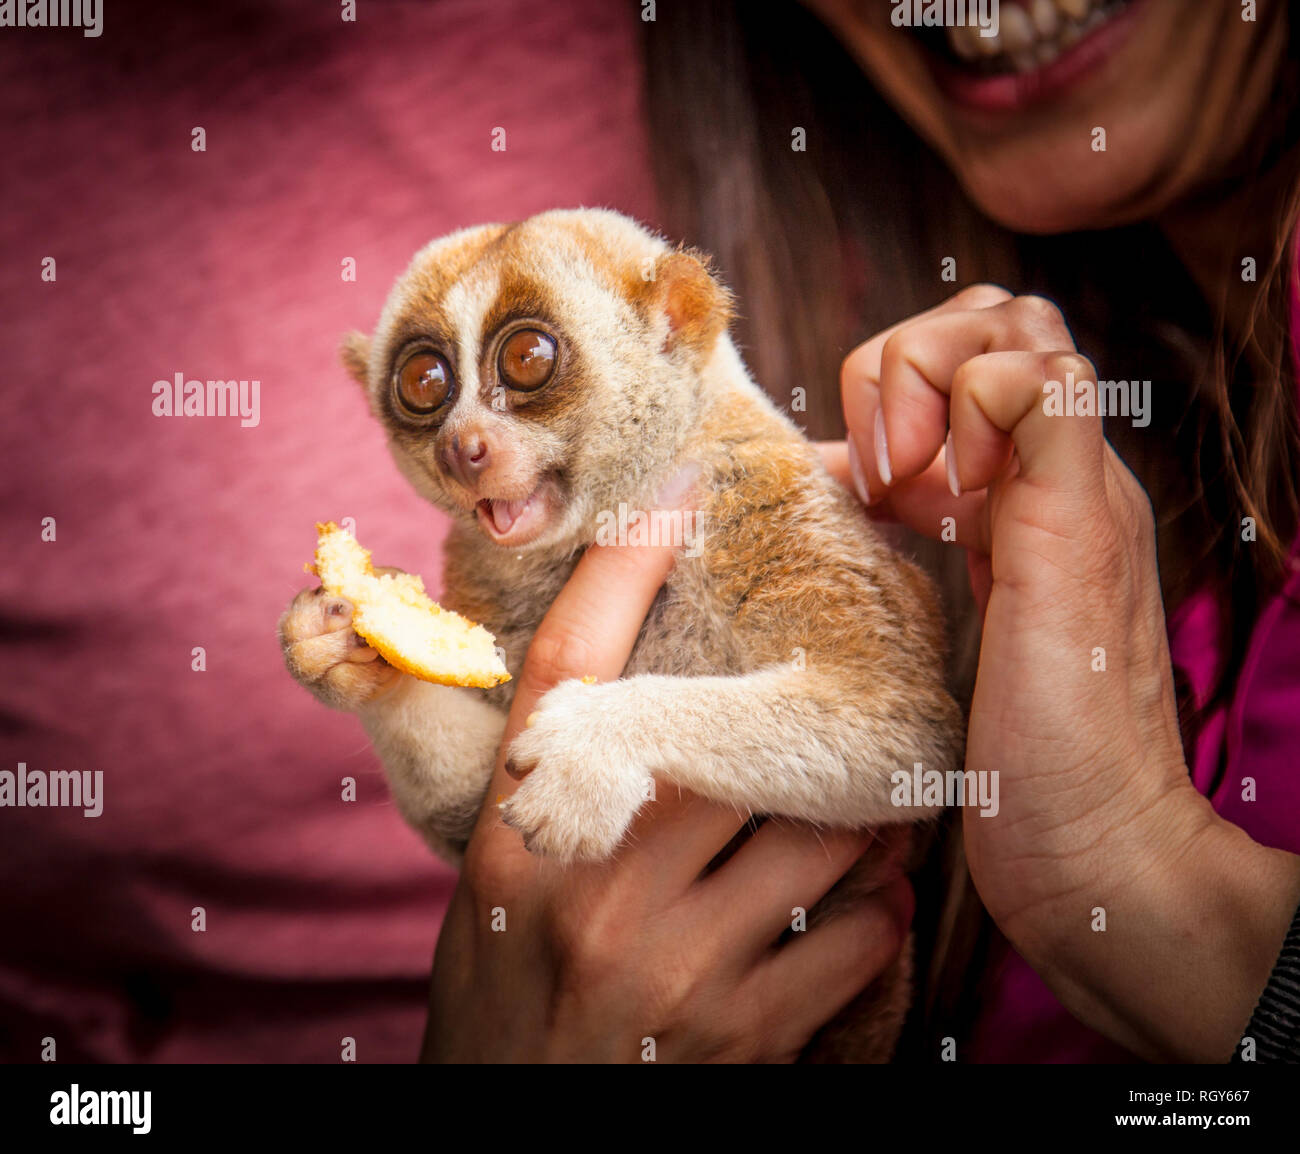 Petting a lemur at a floating market in Thailand. Animal tourism in Thailand. Stock Photo